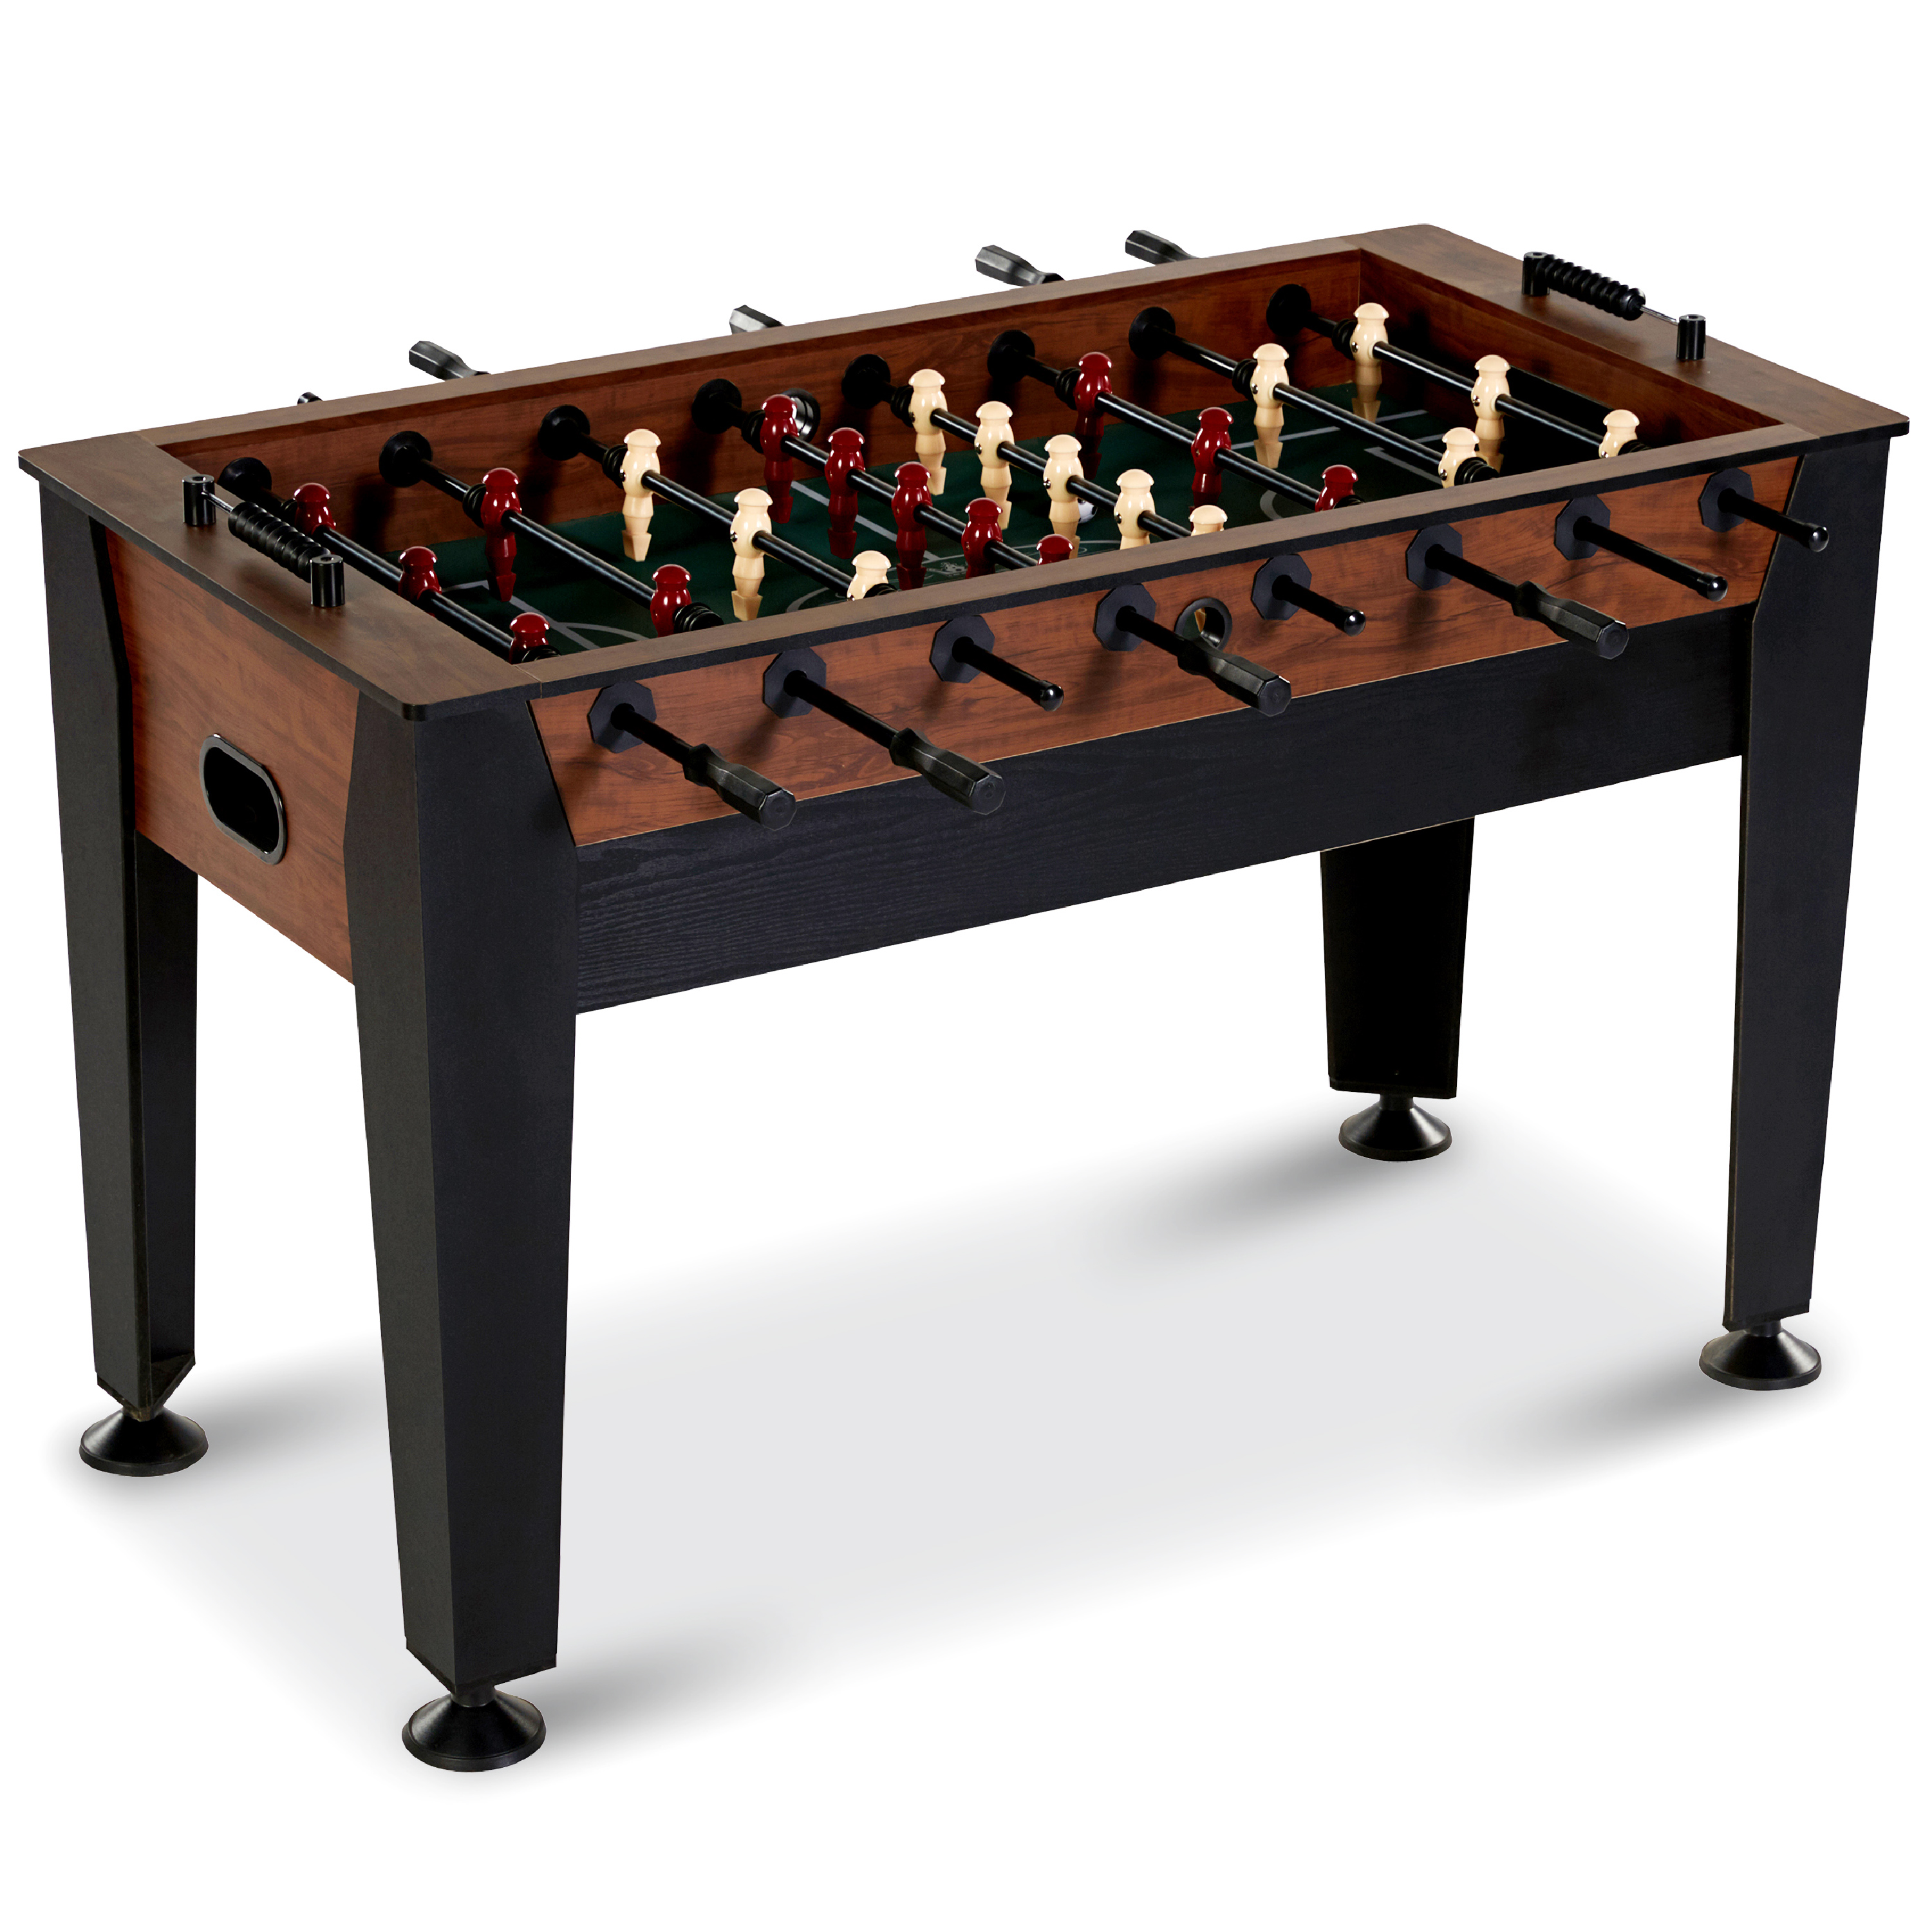 Barrington 54" Furniture Style Foosball Game Table, 54 inch x 27.25 inch x 34 inch - image 1 of 12